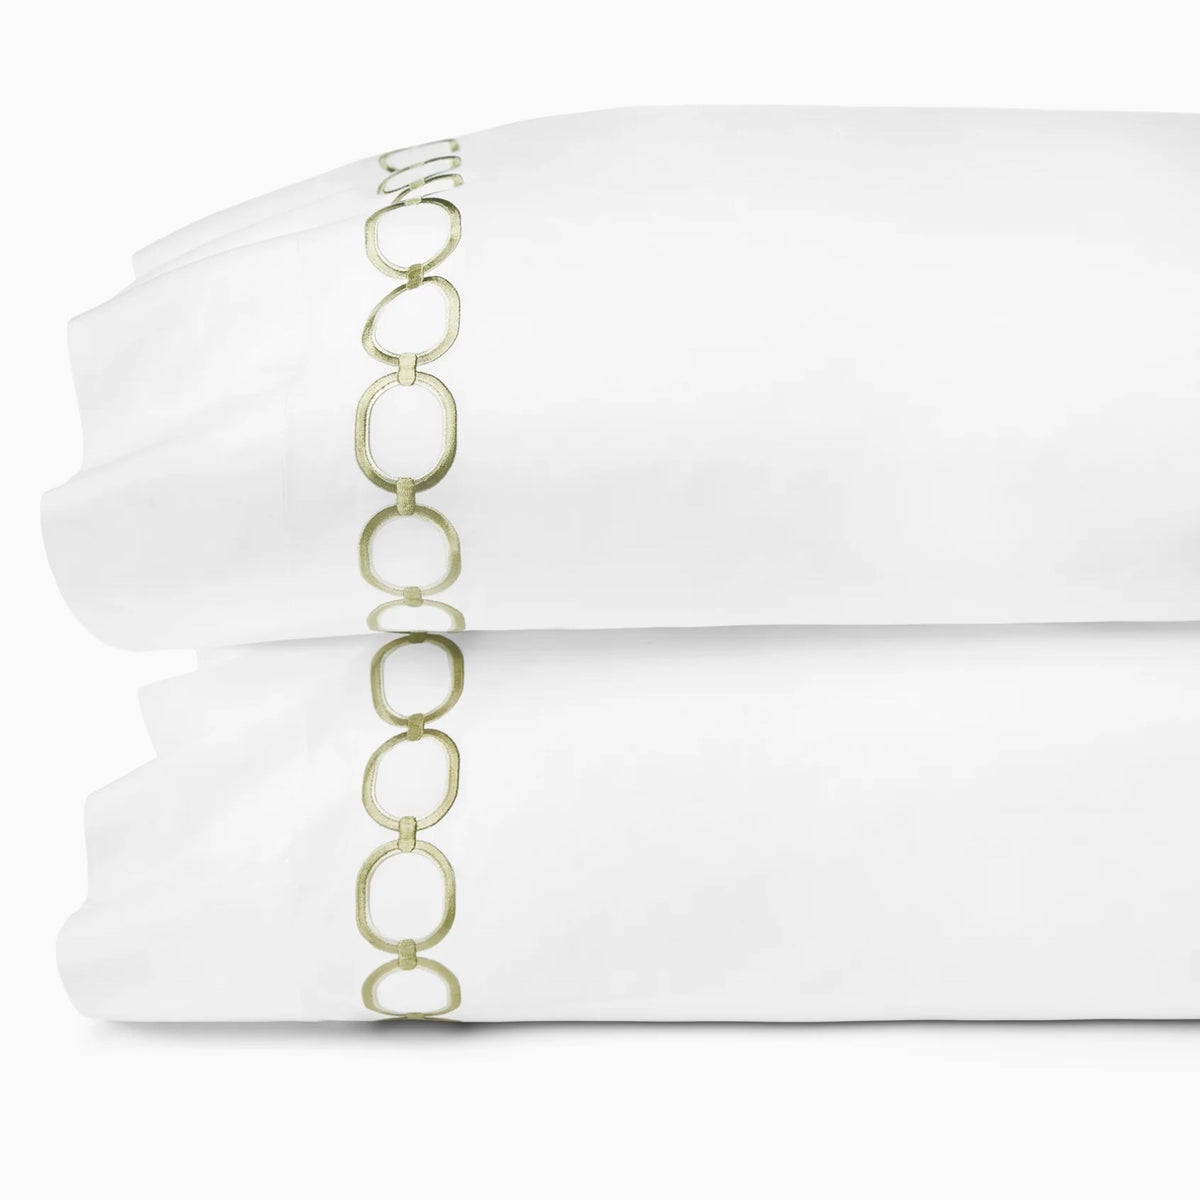 Pair of Pillowcase of Sferra Catena Bedding in Color White/Willow